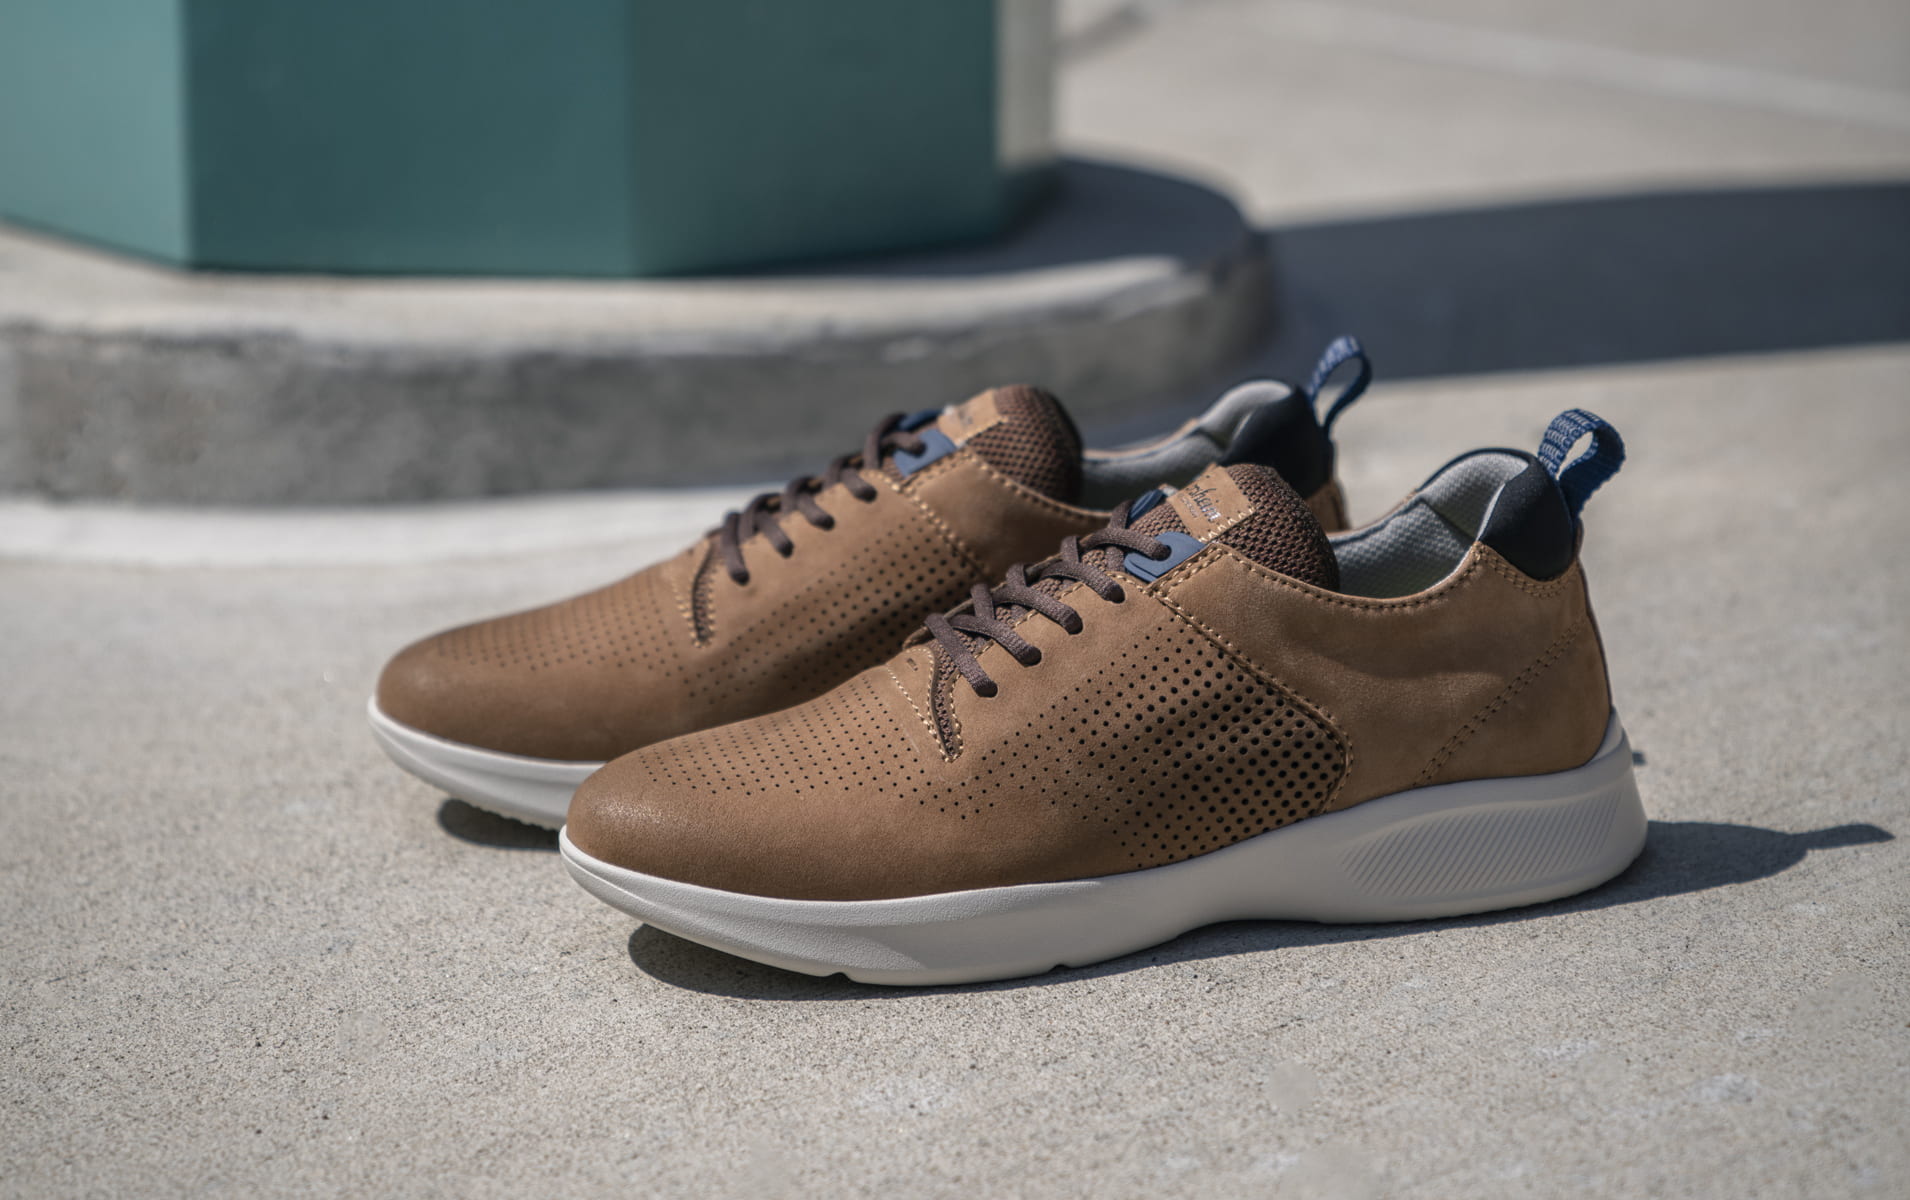 Click to shop Florsheim casuals. Image features the Studio in tan.